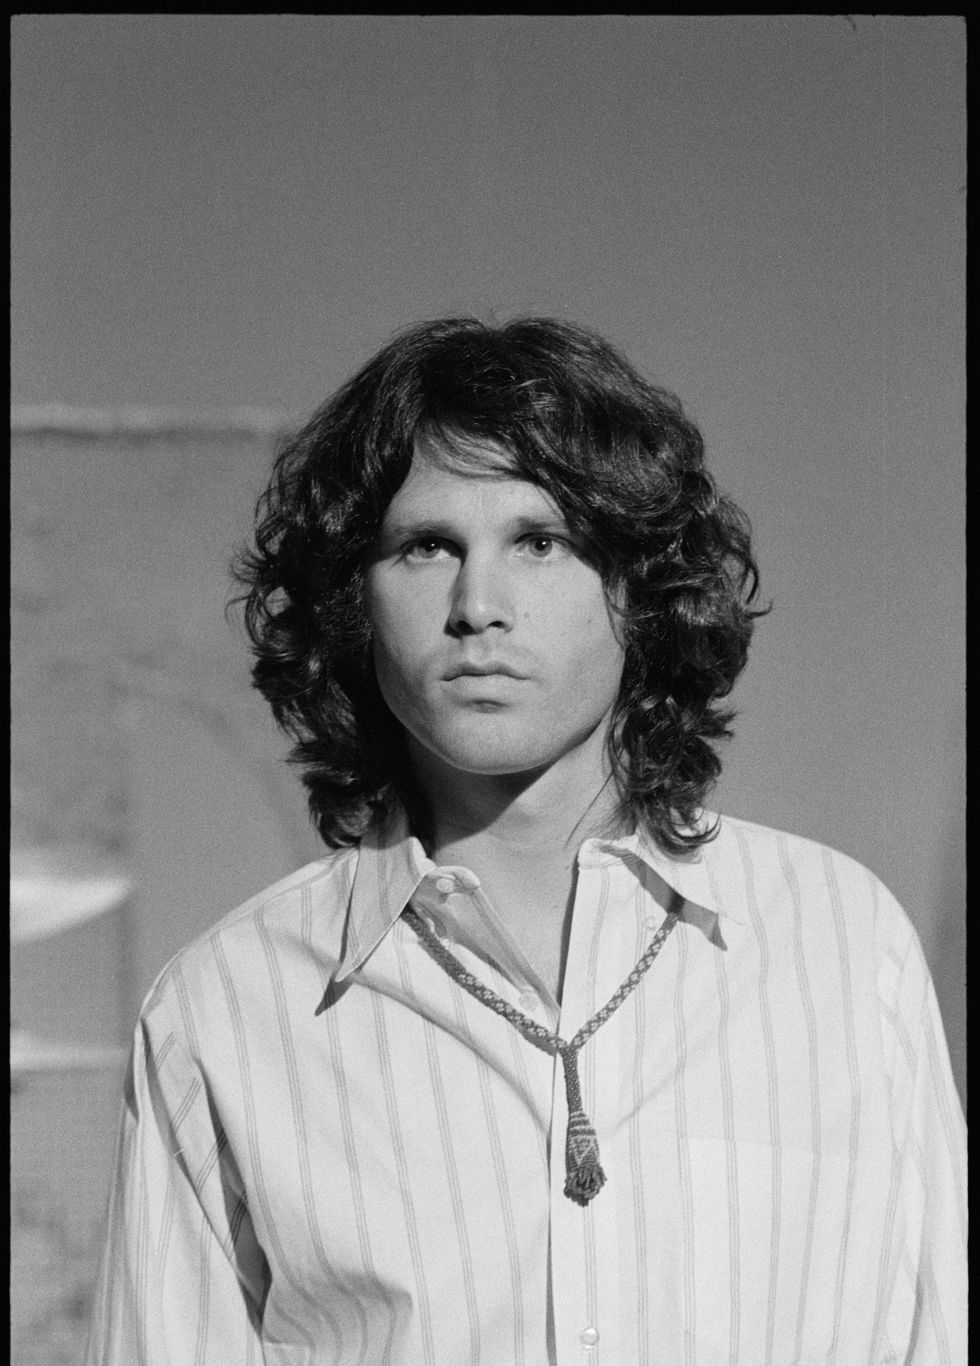 jim morrison on 'the smothers brothers comedy hour'